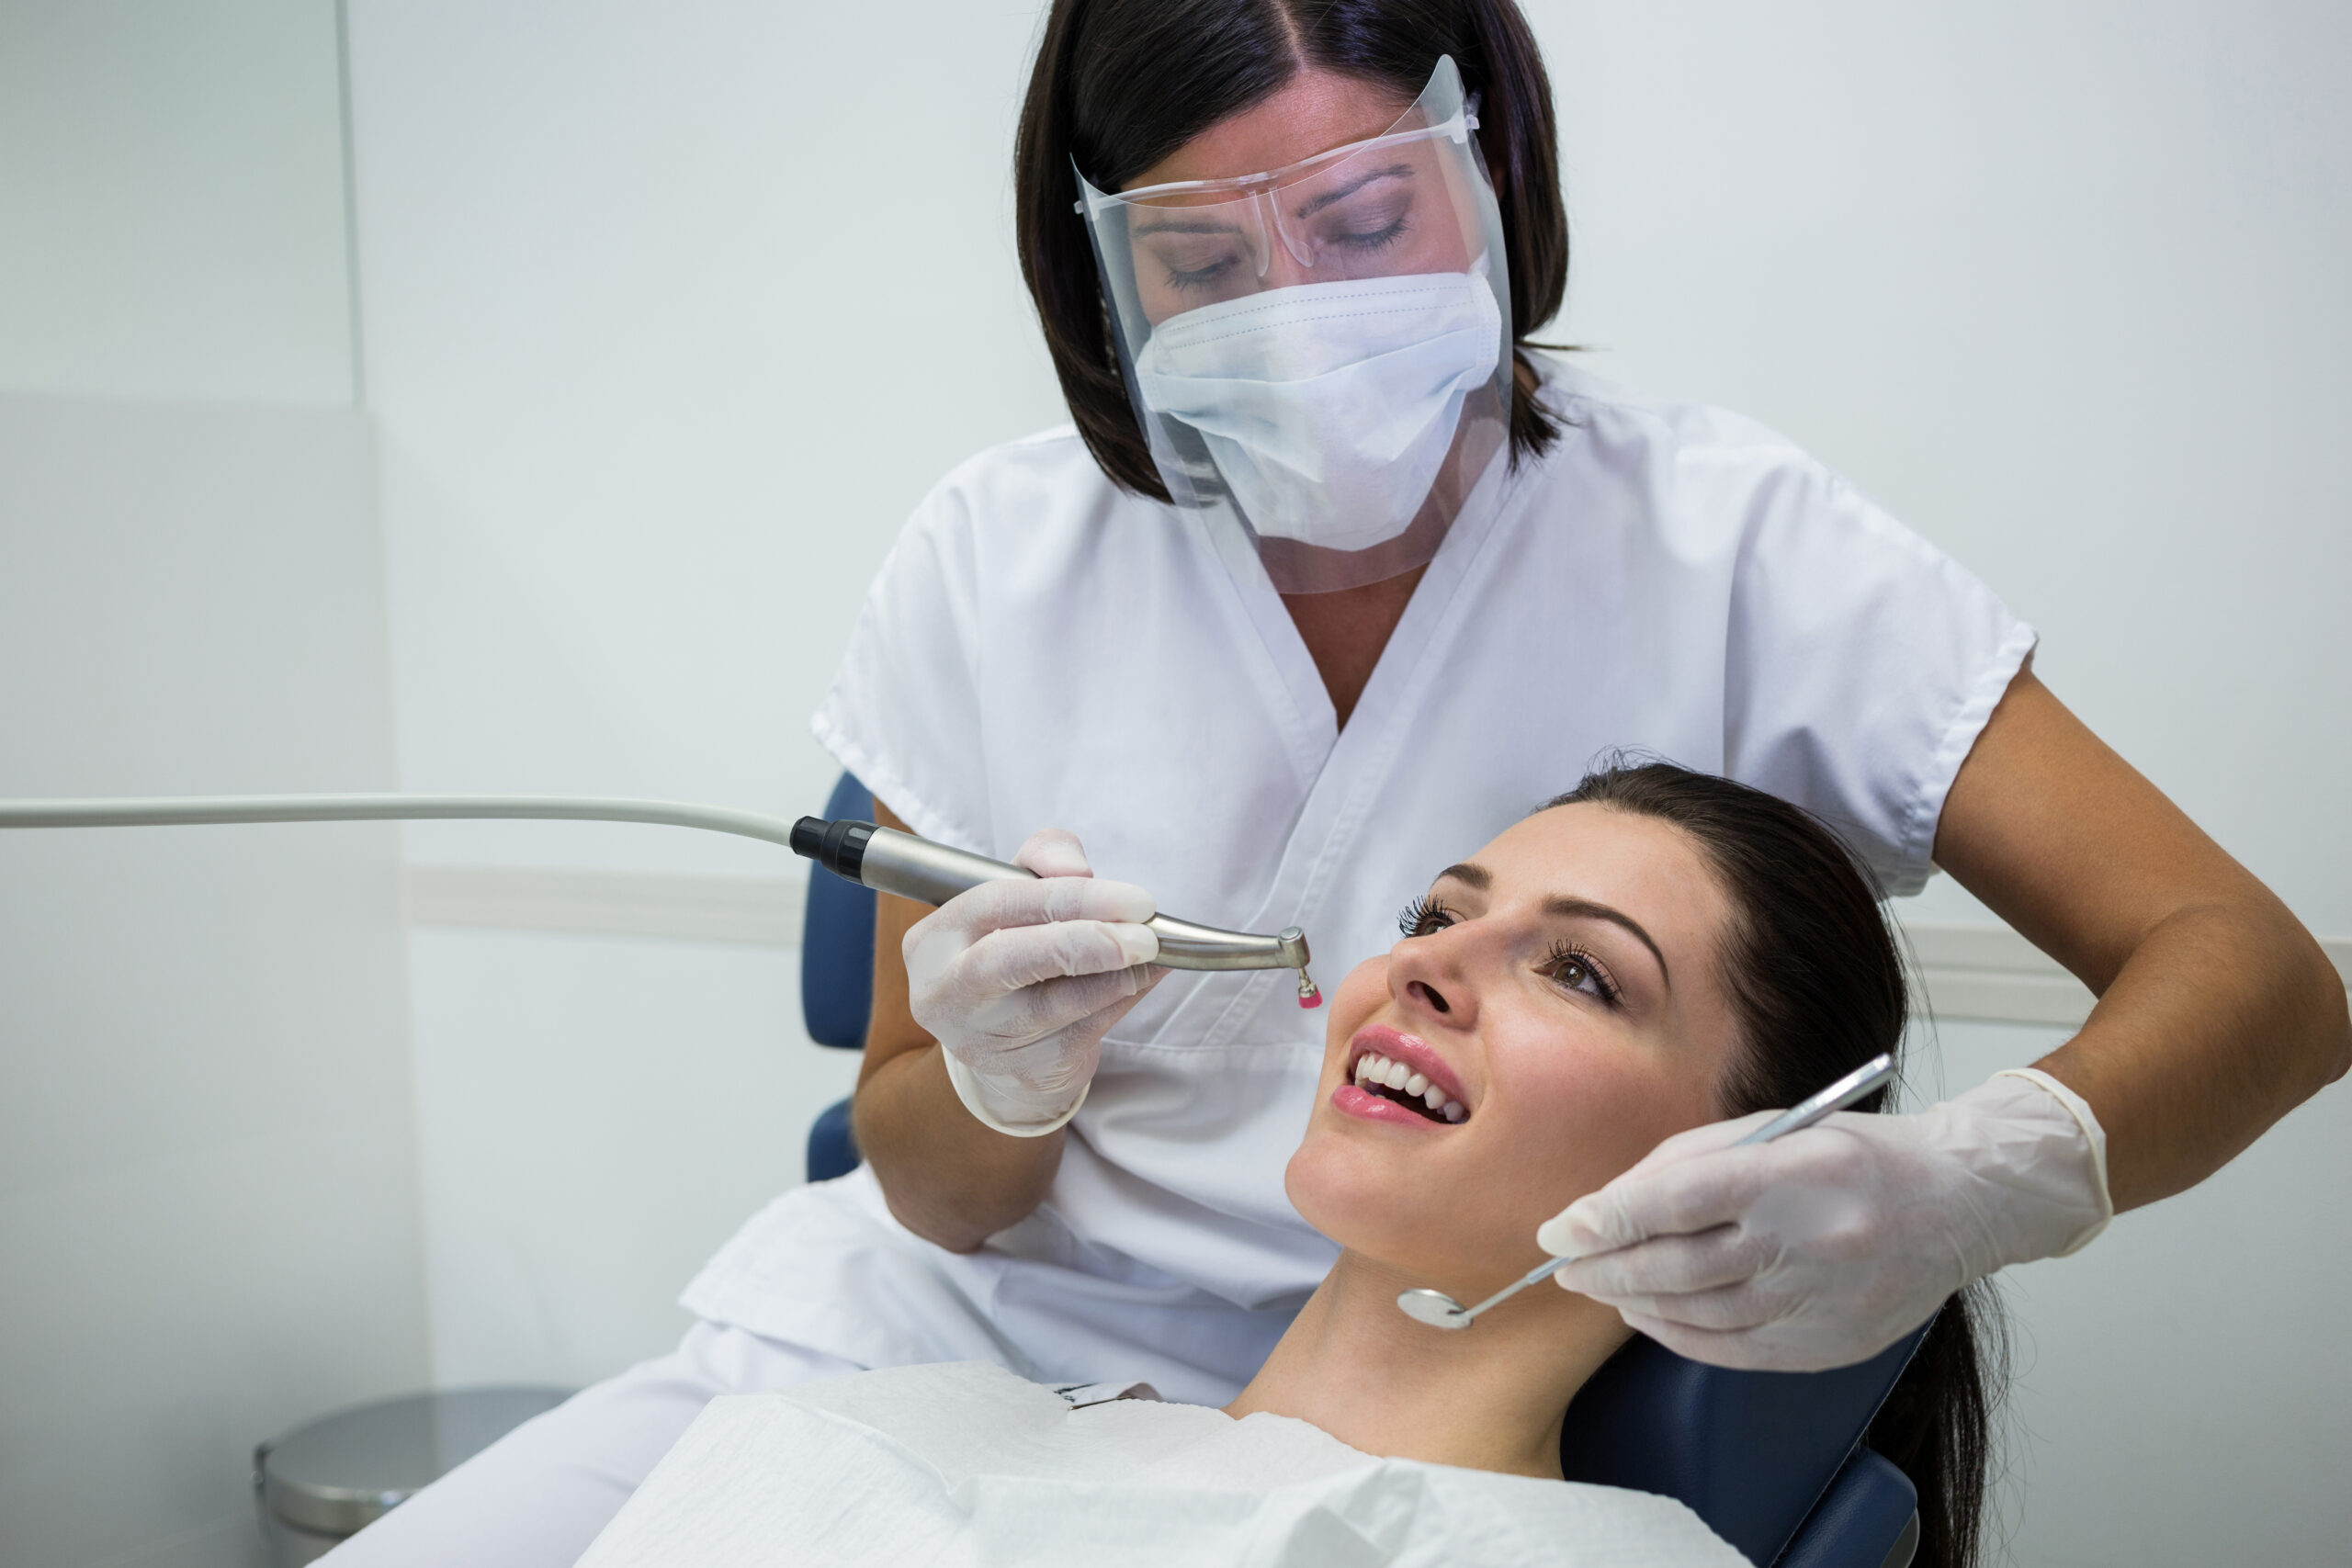 How common is sedation dentistry Lewisville TX in dental practices?